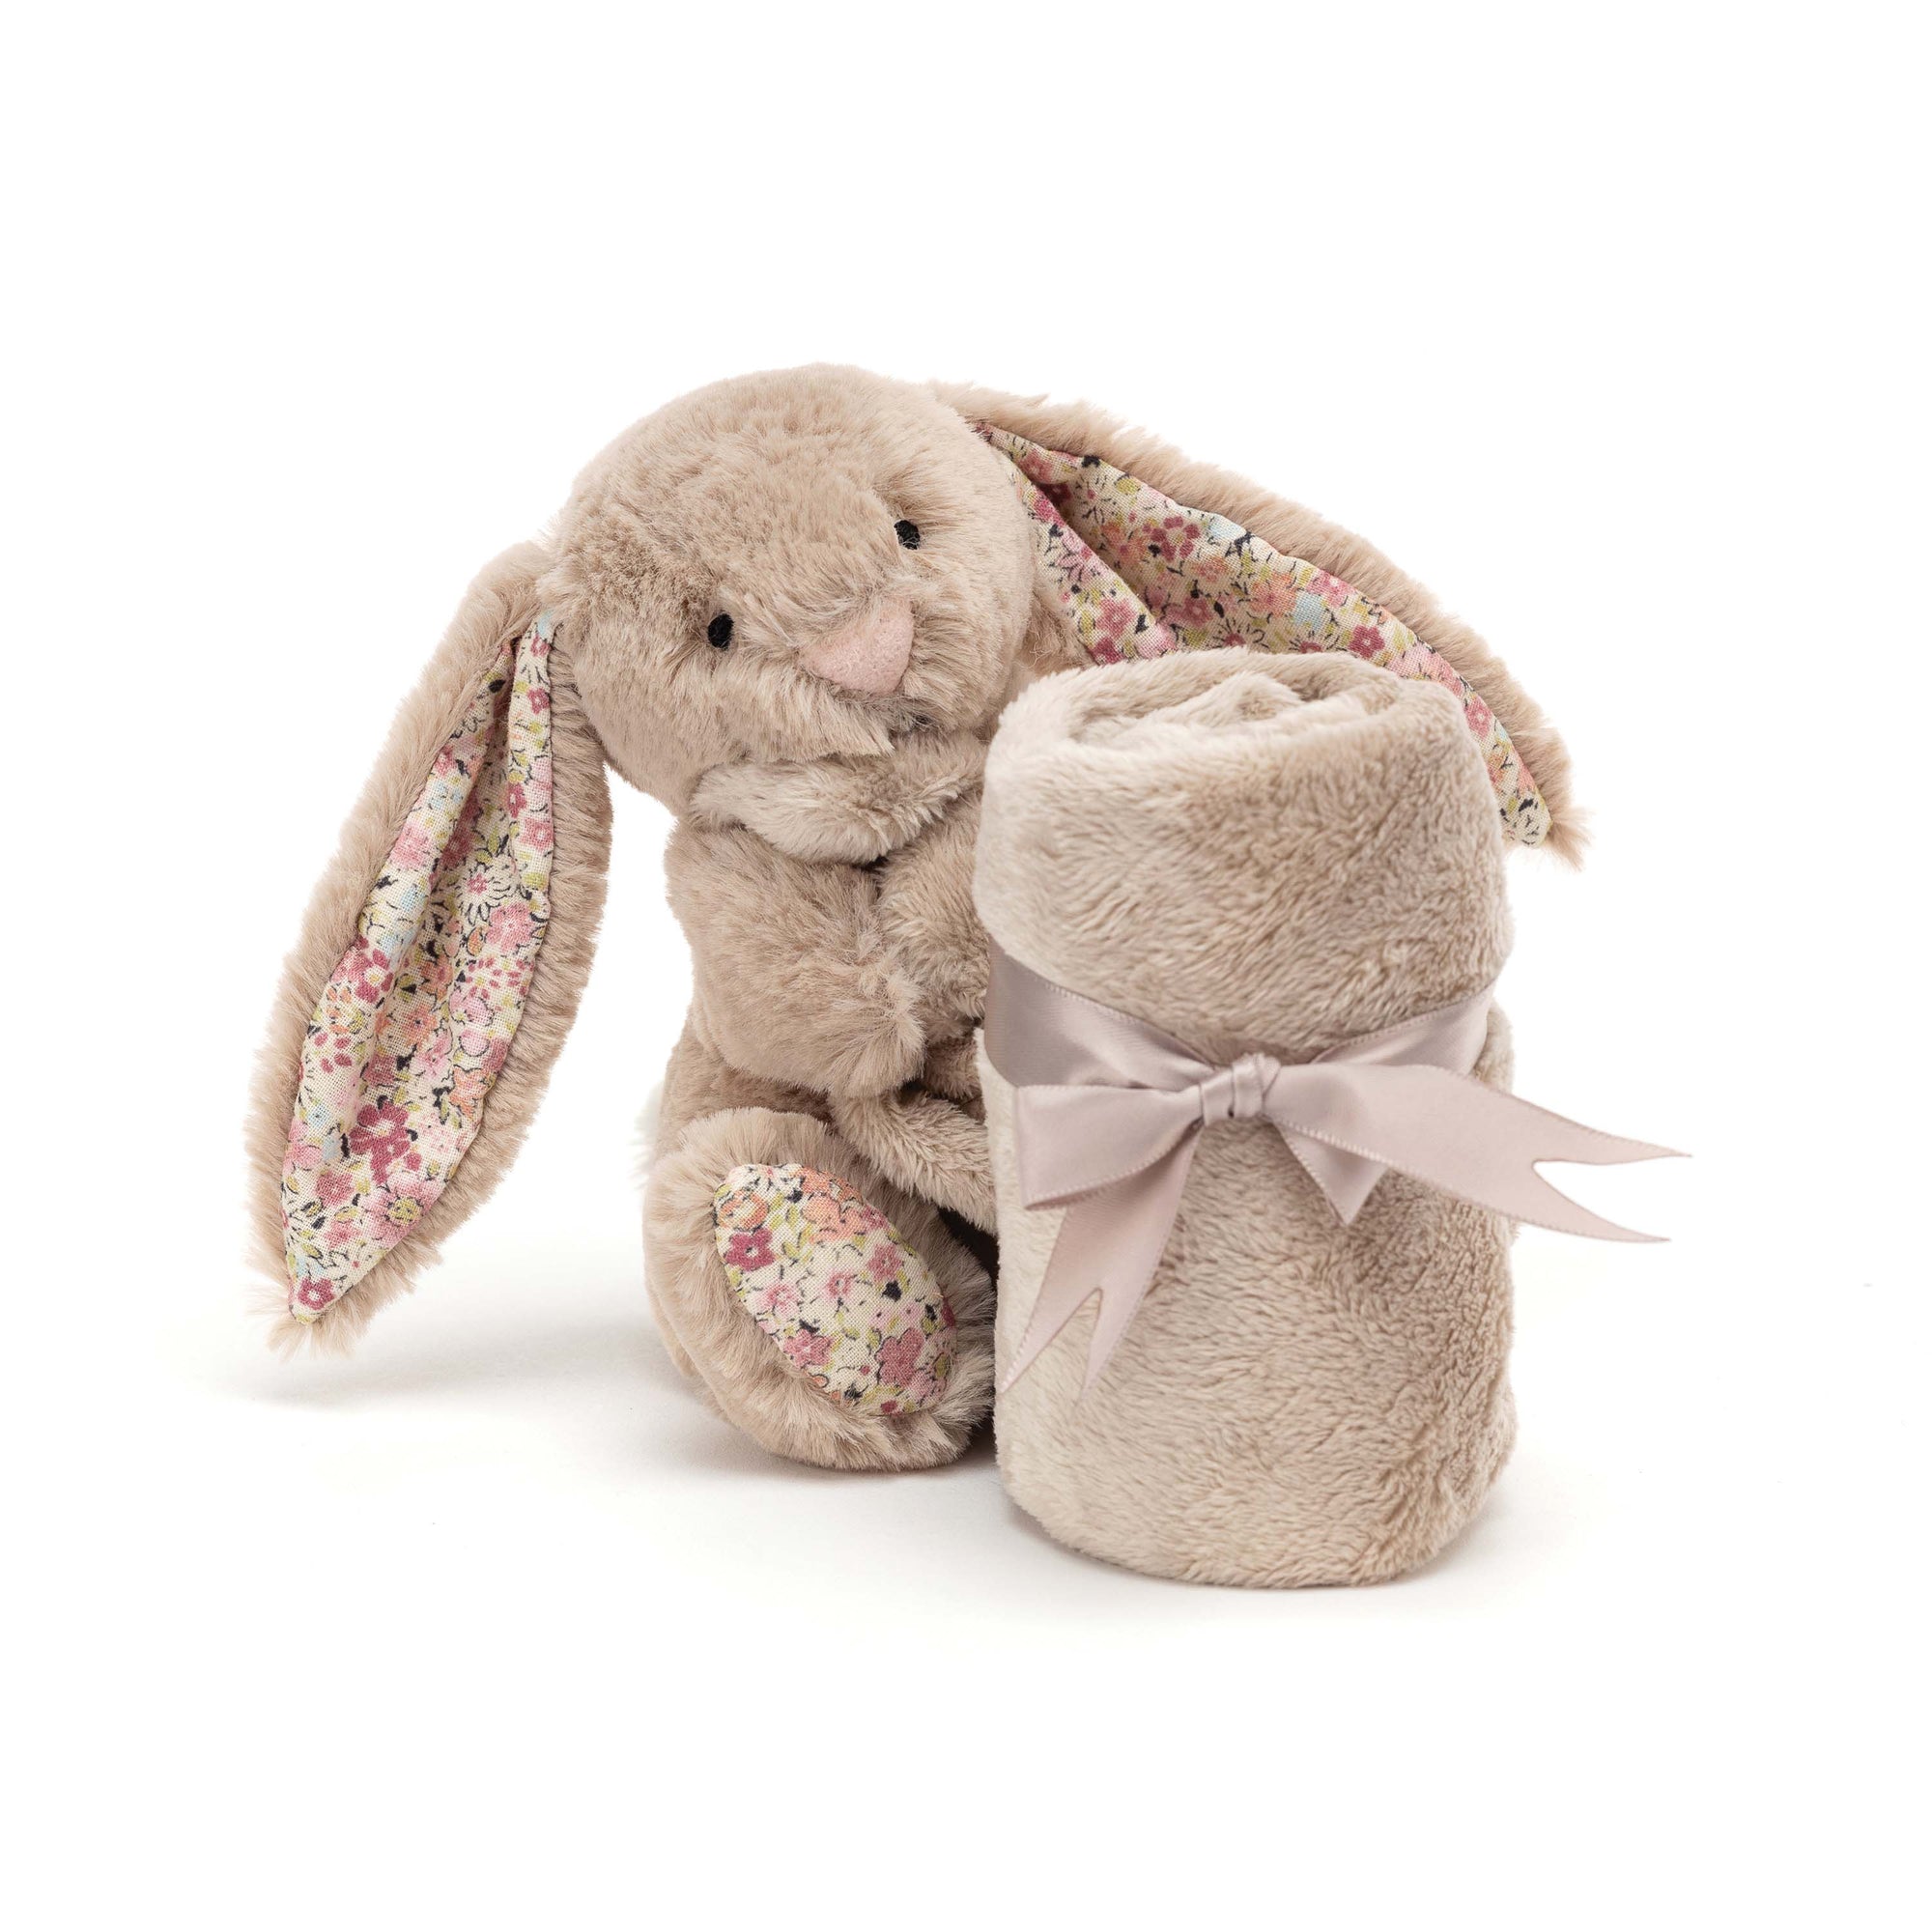 jellycat bunny comforter - angus and dudley